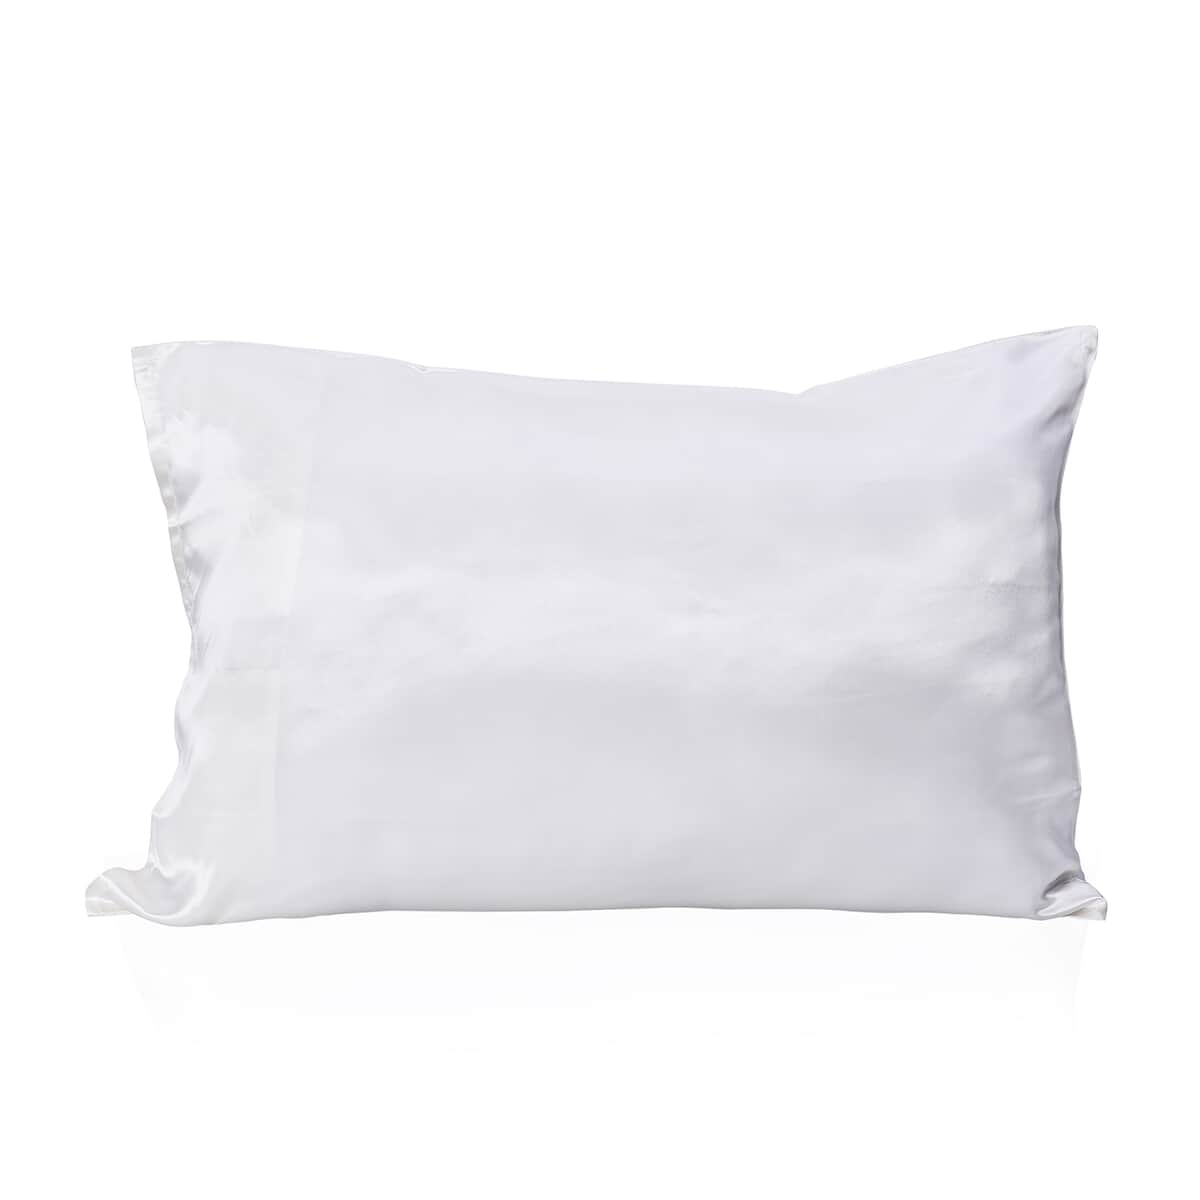 Symphony Home Ivory 100% Mulberry Silk Pillowcase Infused with Hyaluronic Acid & Argan Oil -Full (20x26) image number 1